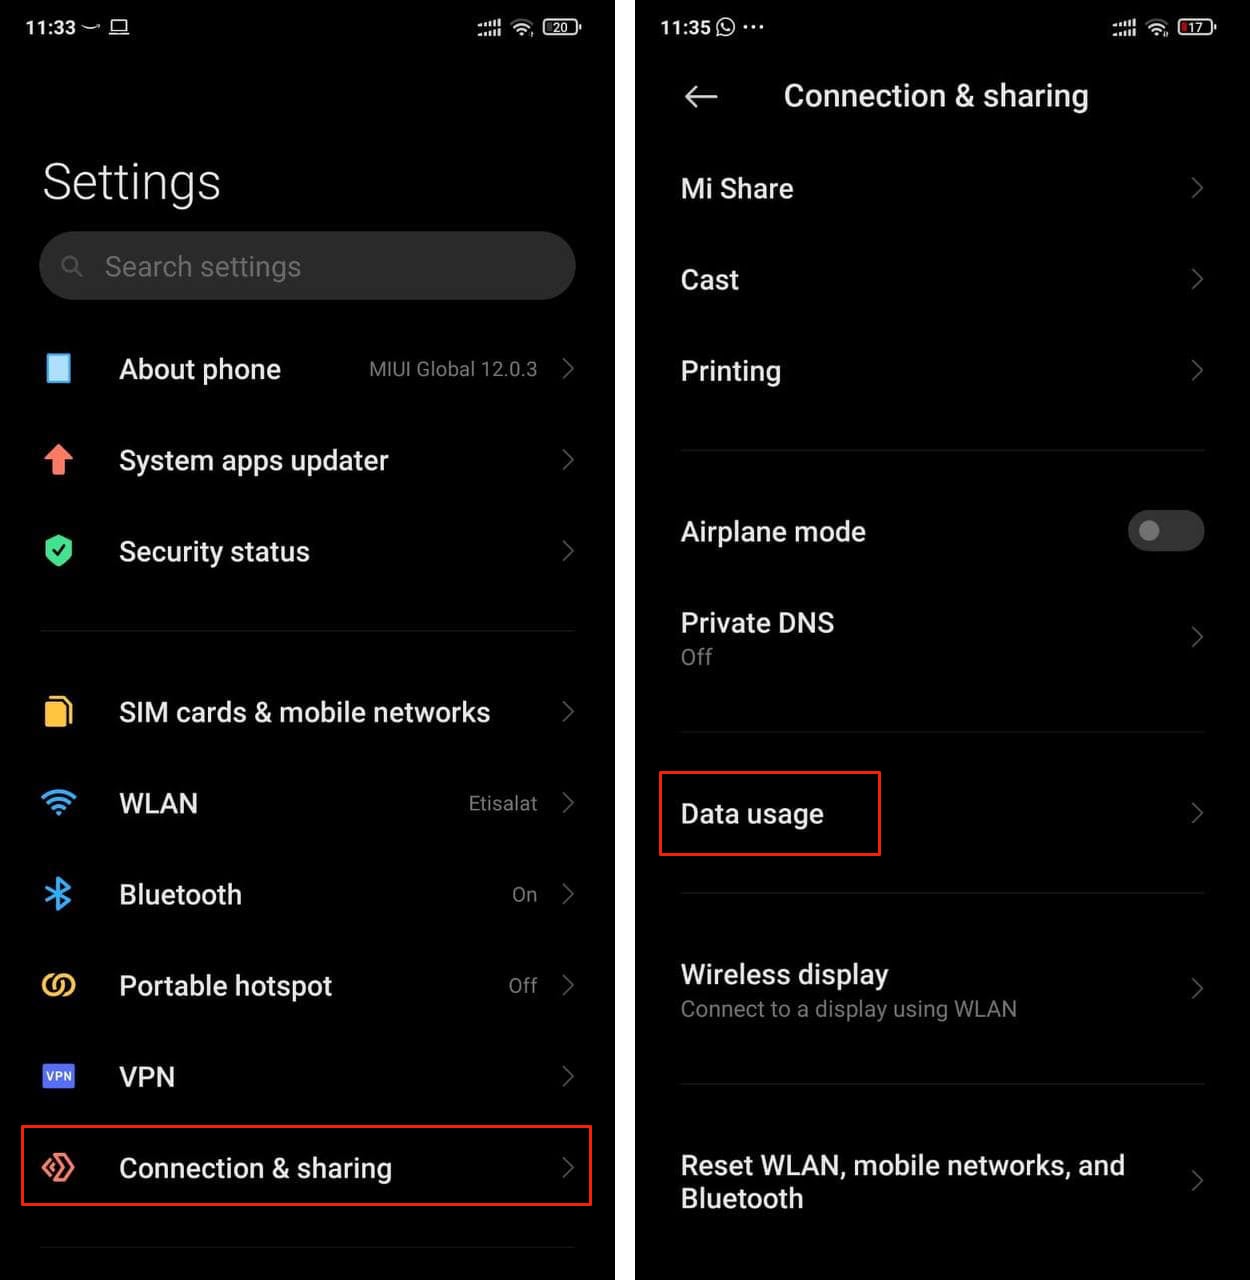 Go to connection & sharing and tap on data usage